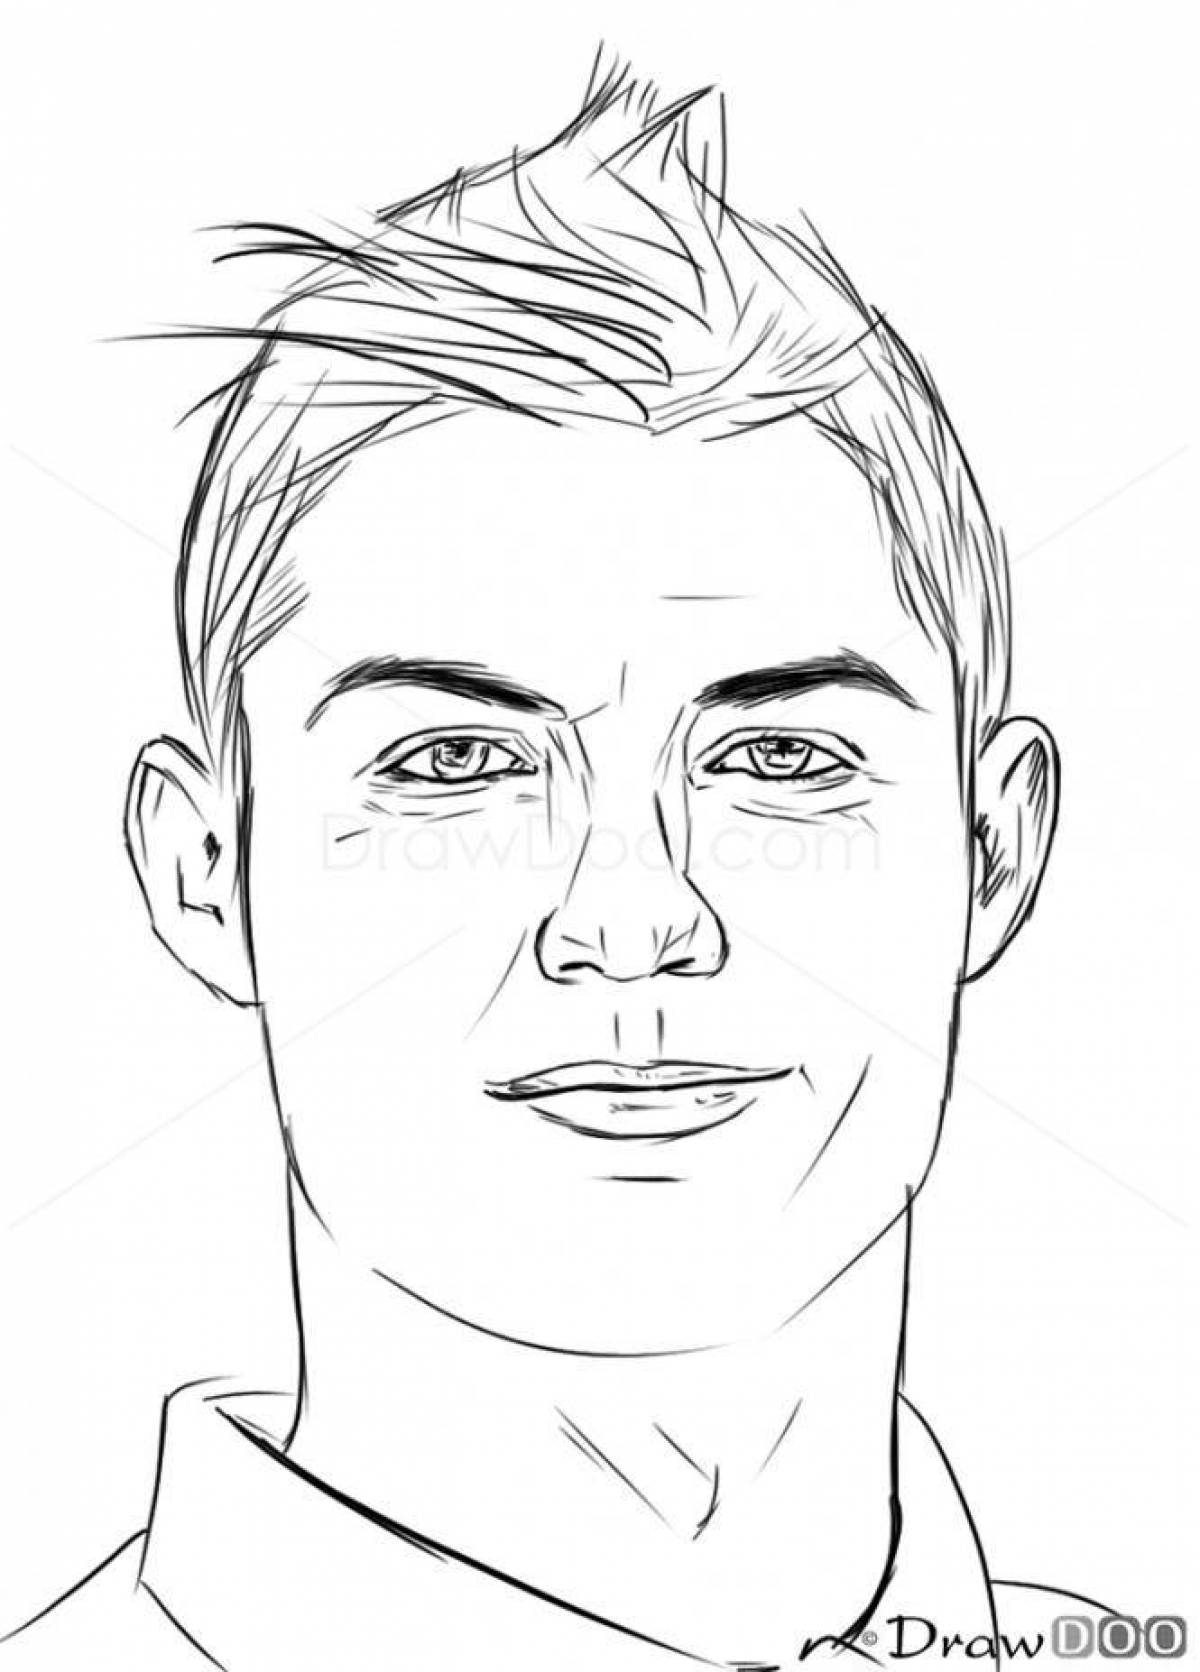 Coloring a gorgeous male face